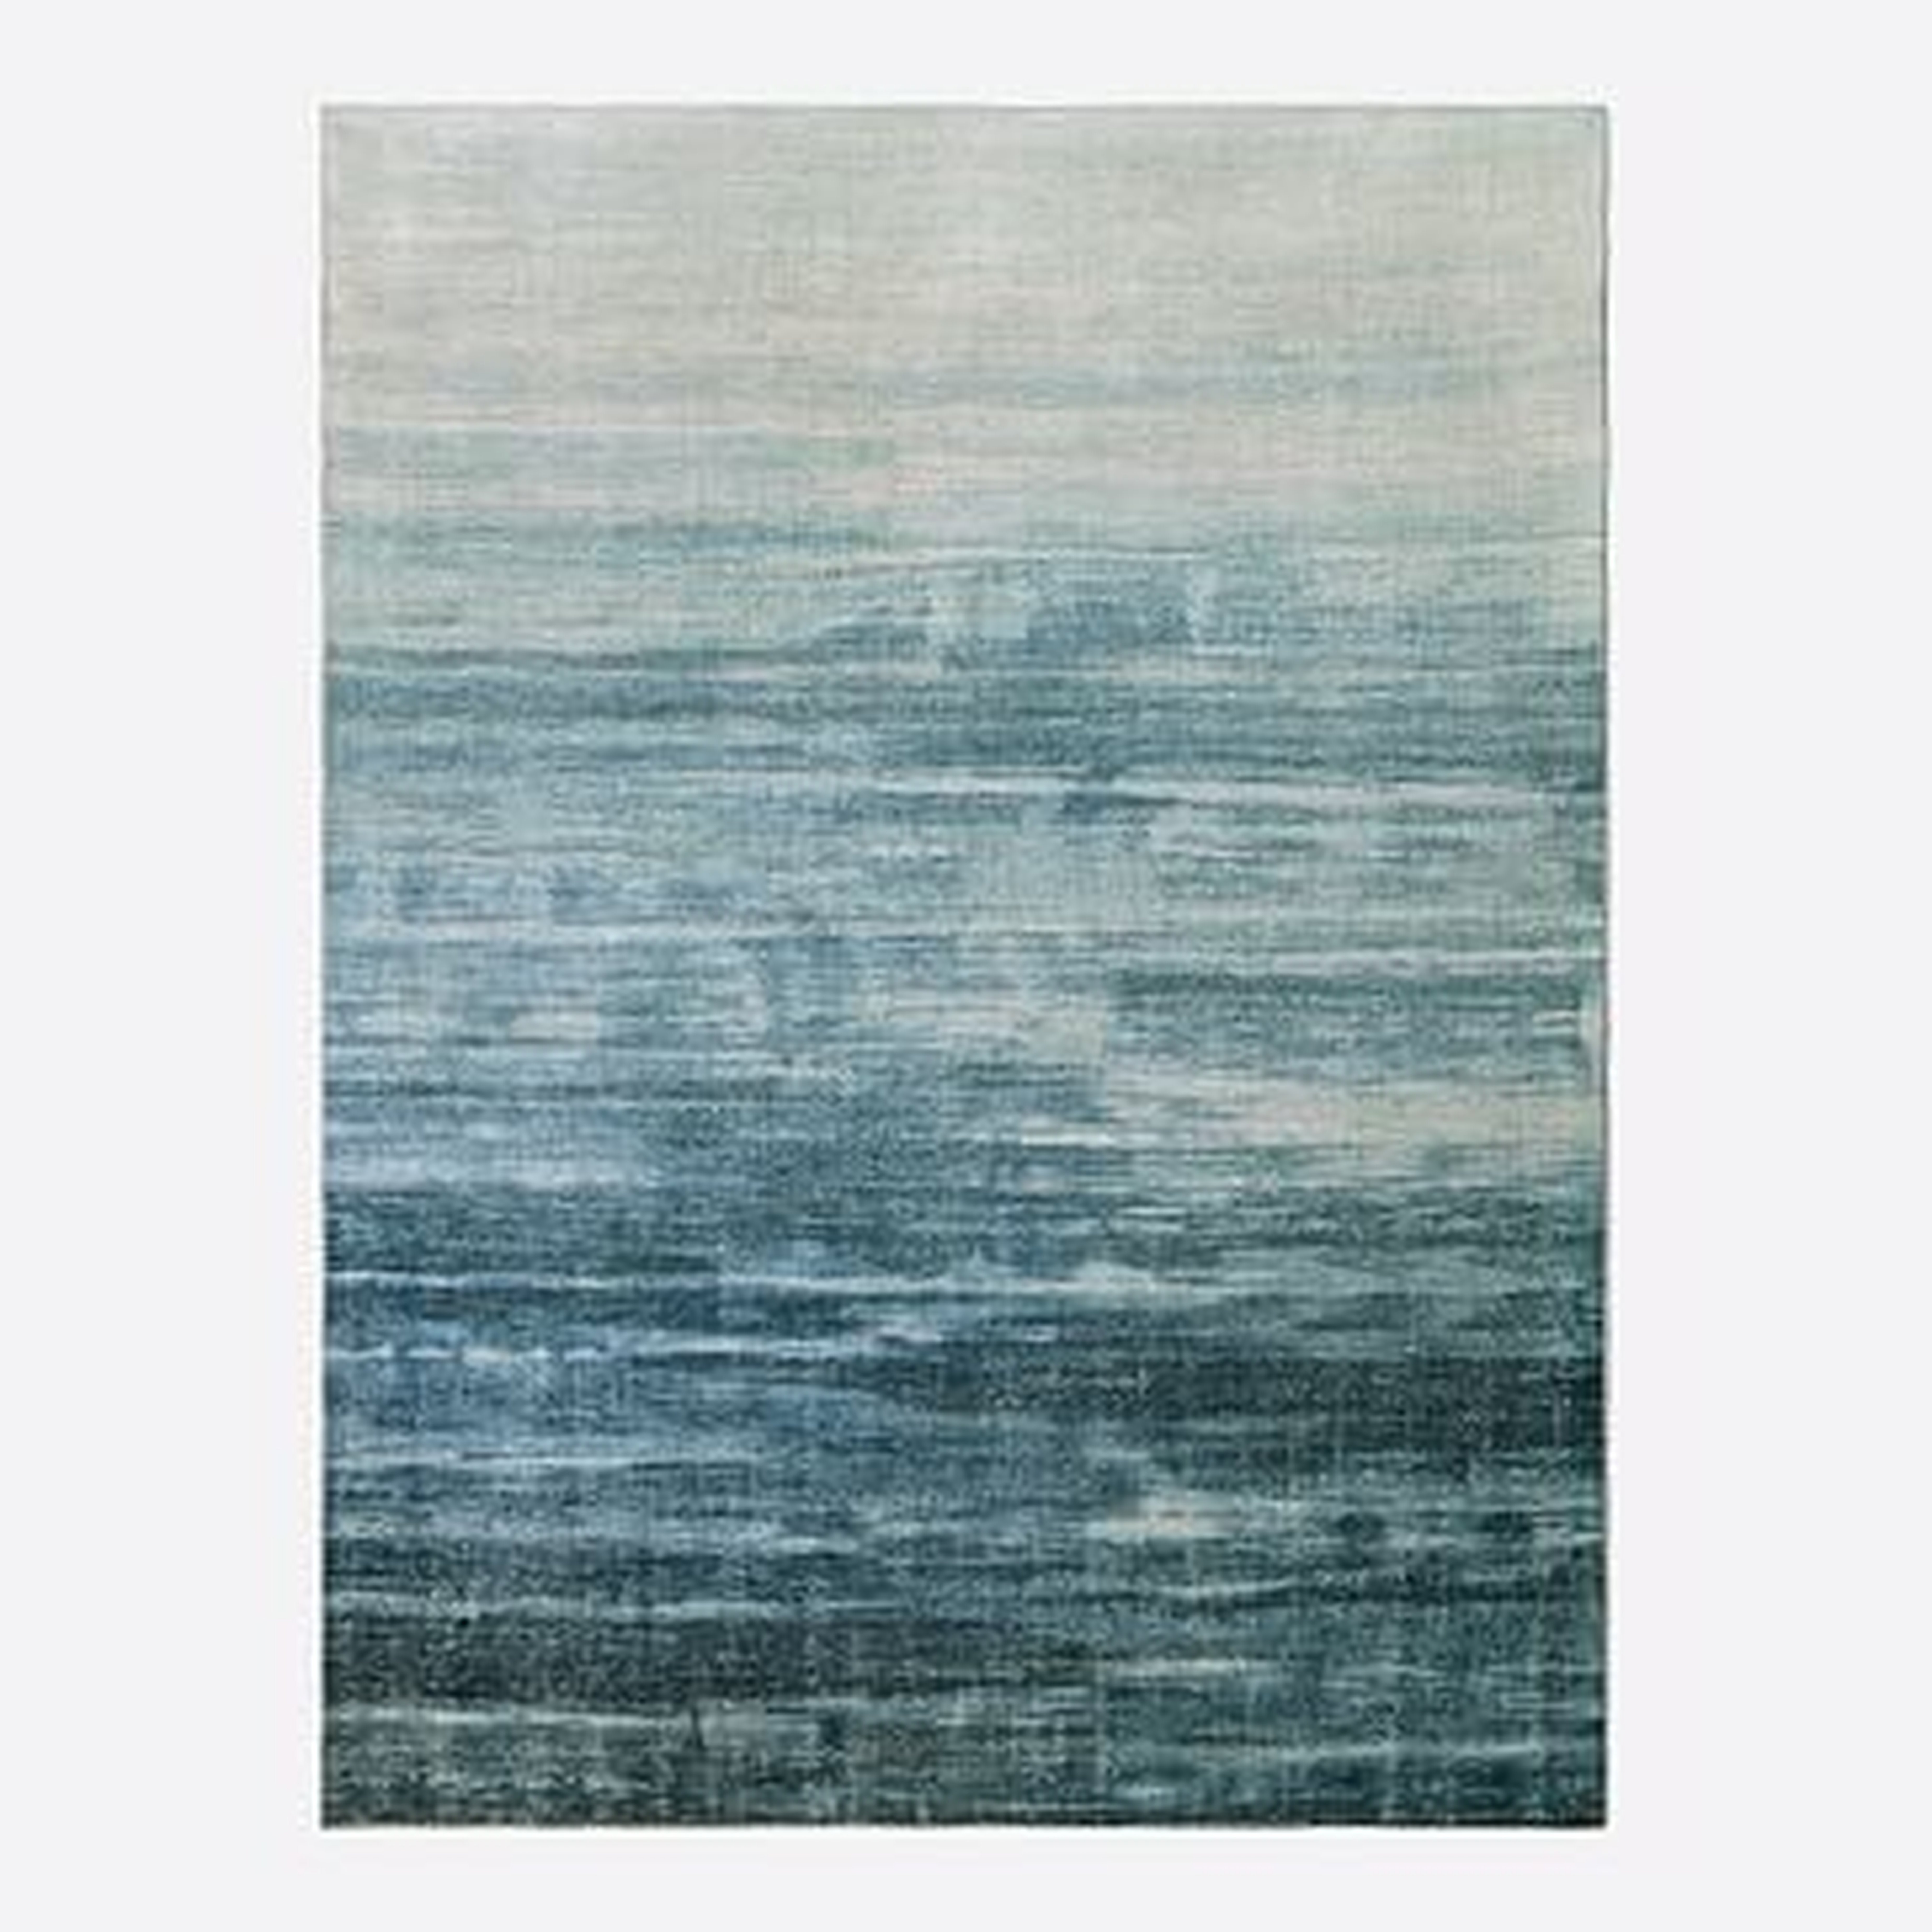 Painted Ombre Rug, Midnight, 9'x12' - West Elm